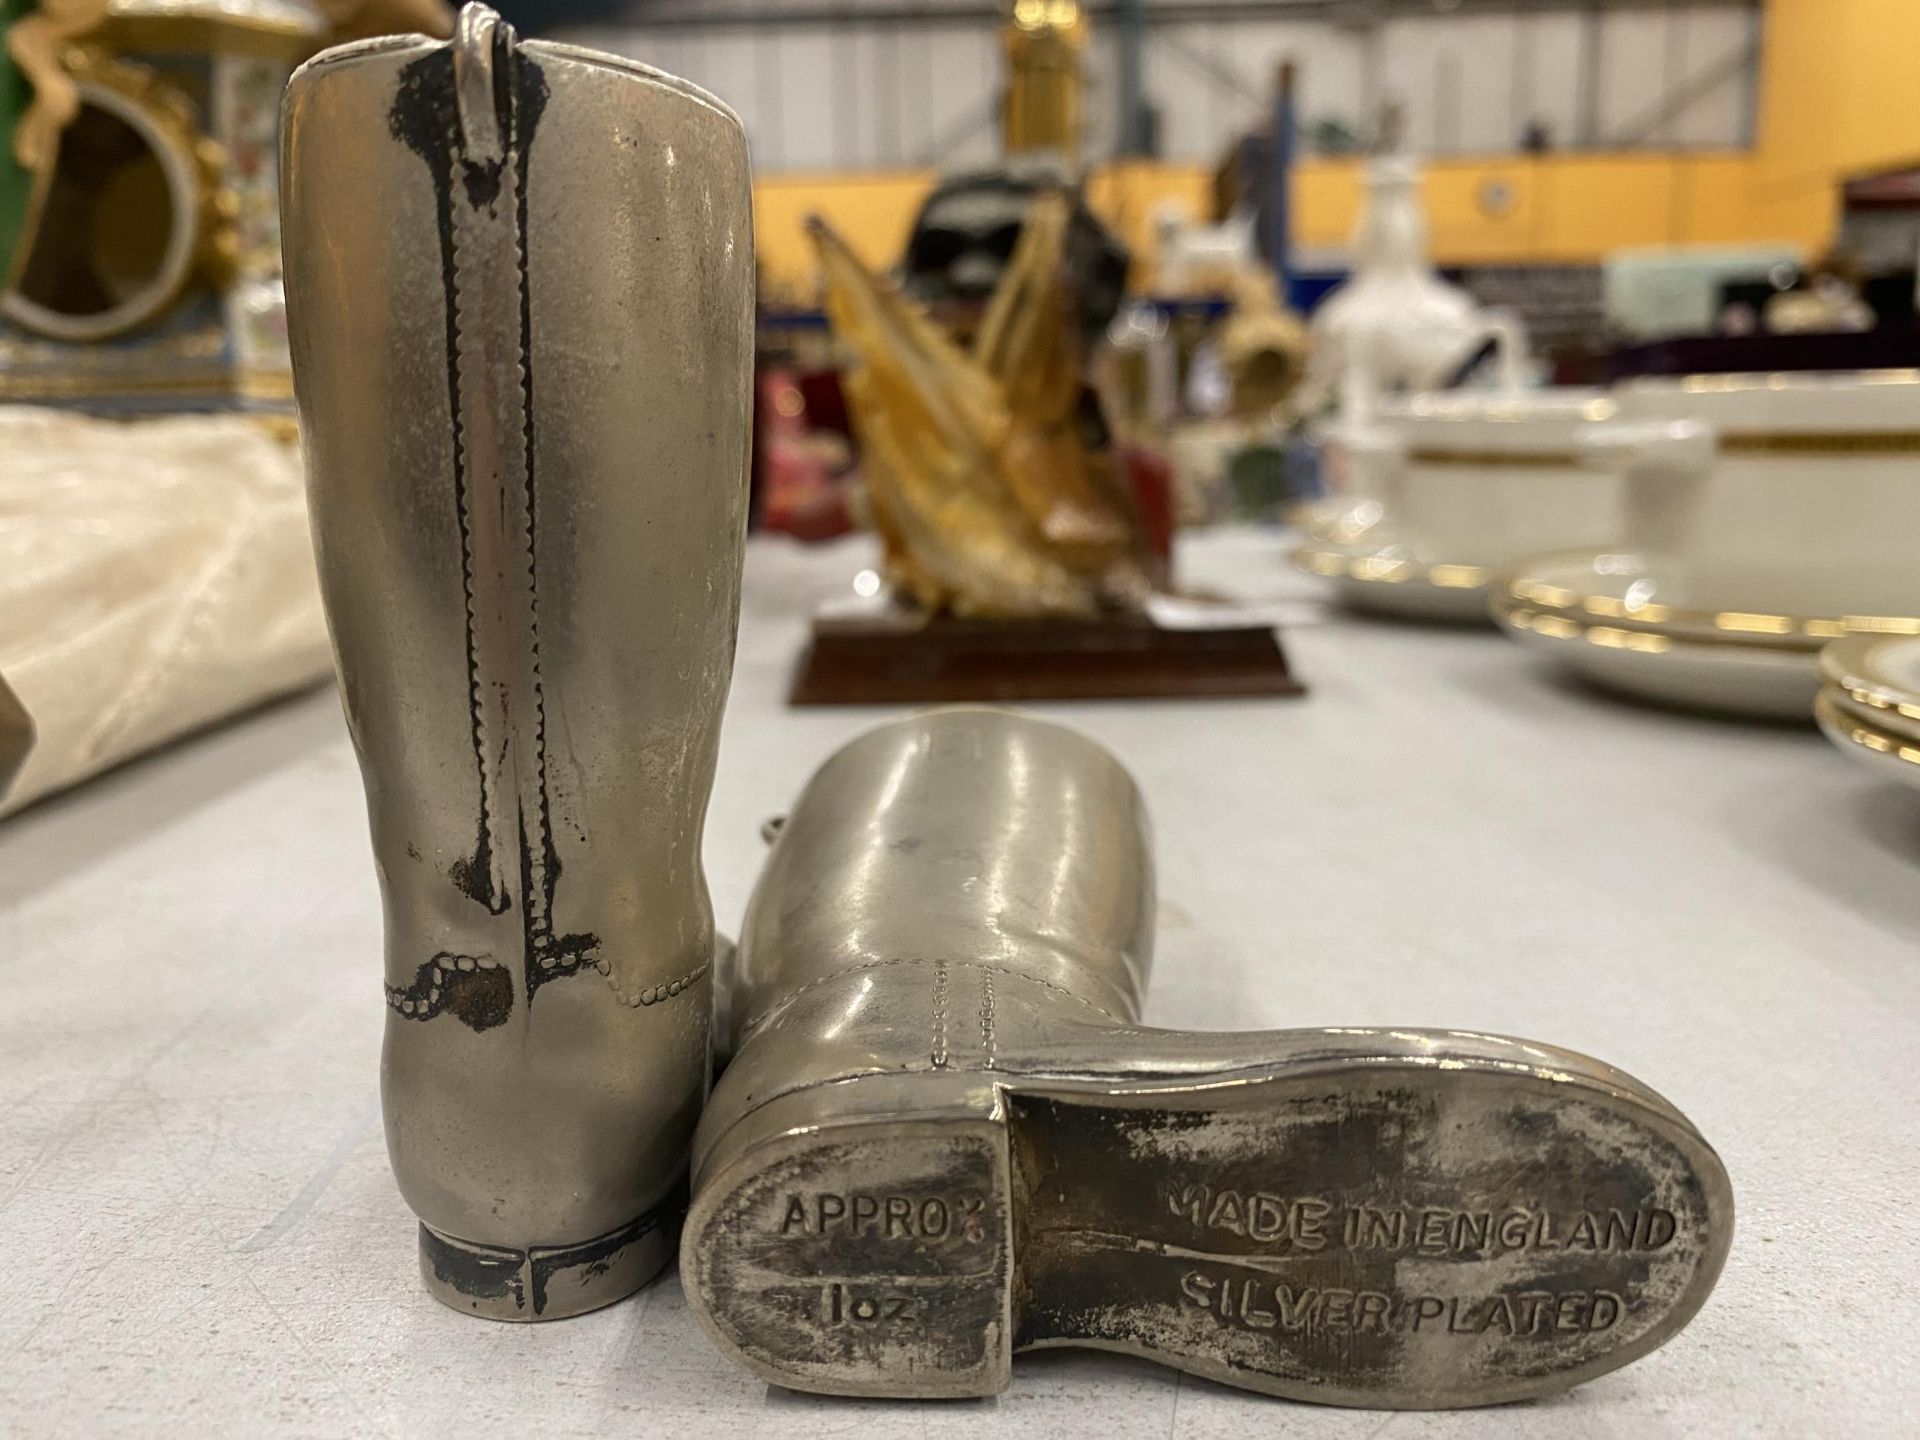 A PAIR OF SILVER PLATED WELLY BOOTS, ONE WEIGHING 1 oz, THE OTHER 1.5 oz, HEIGHT 9CM - Image 3 of 3